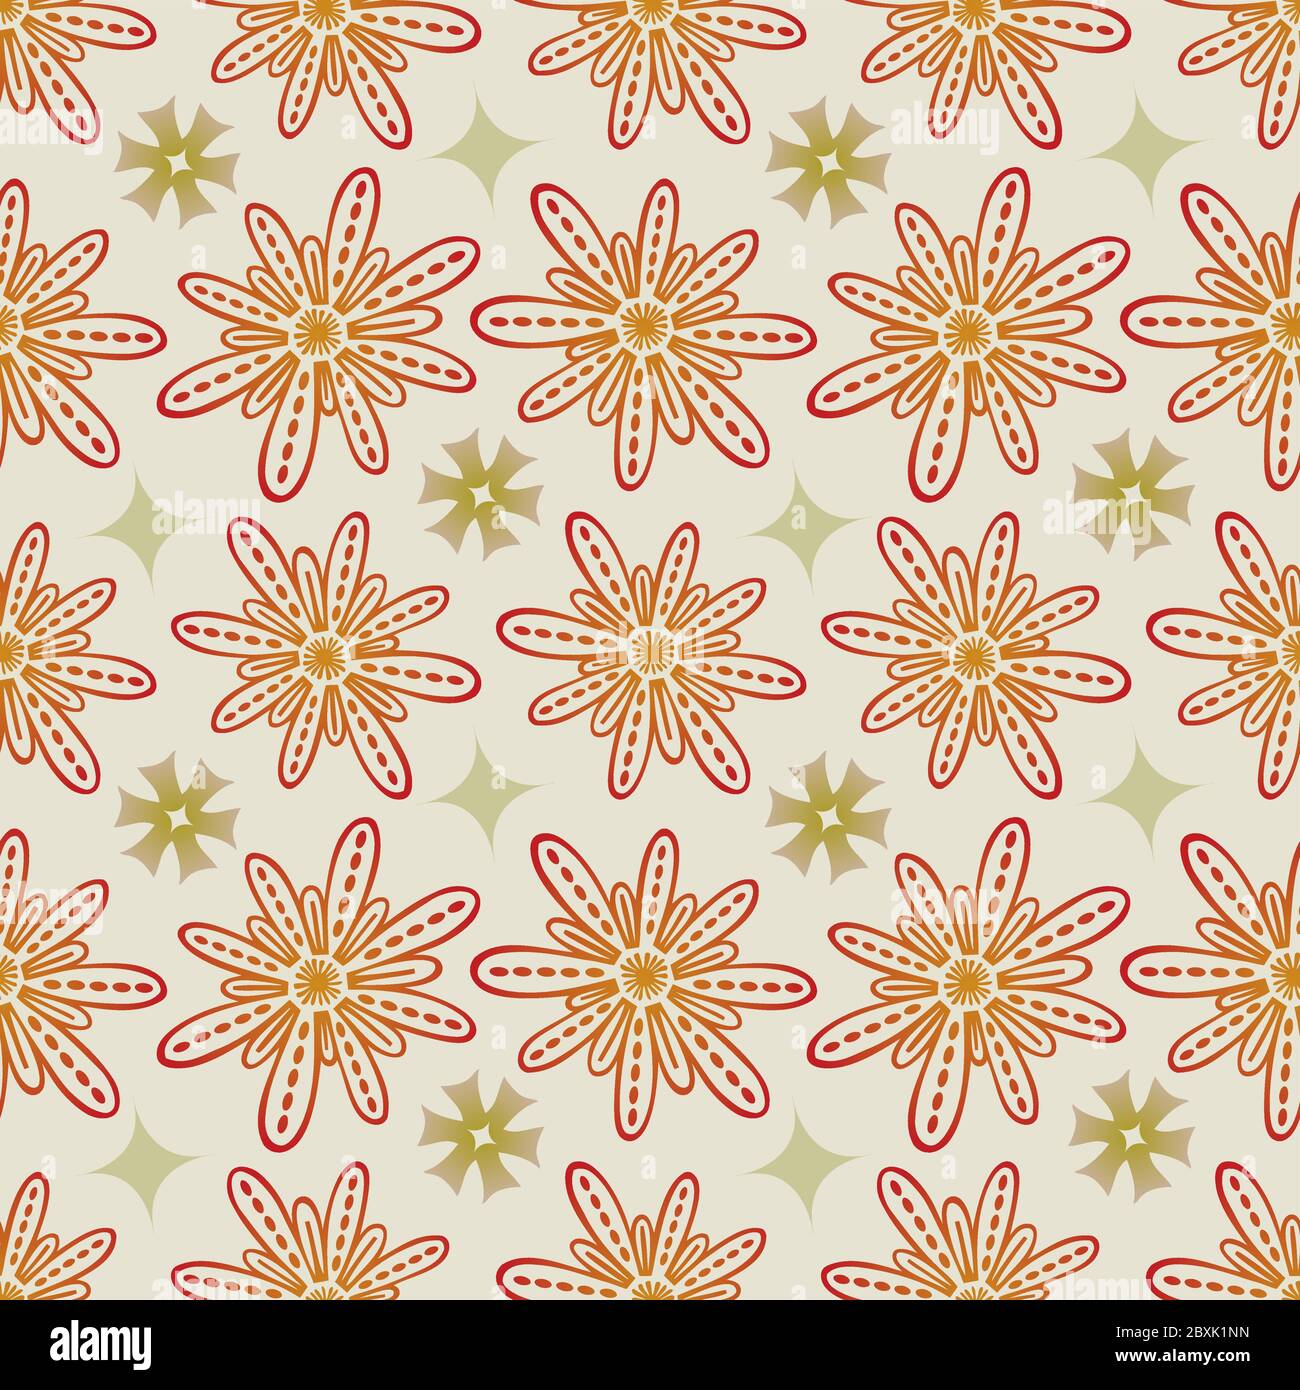 Flower Seamless Pattern in Beige and Khaki - Pastel Colors on Gray Background Stock Vector